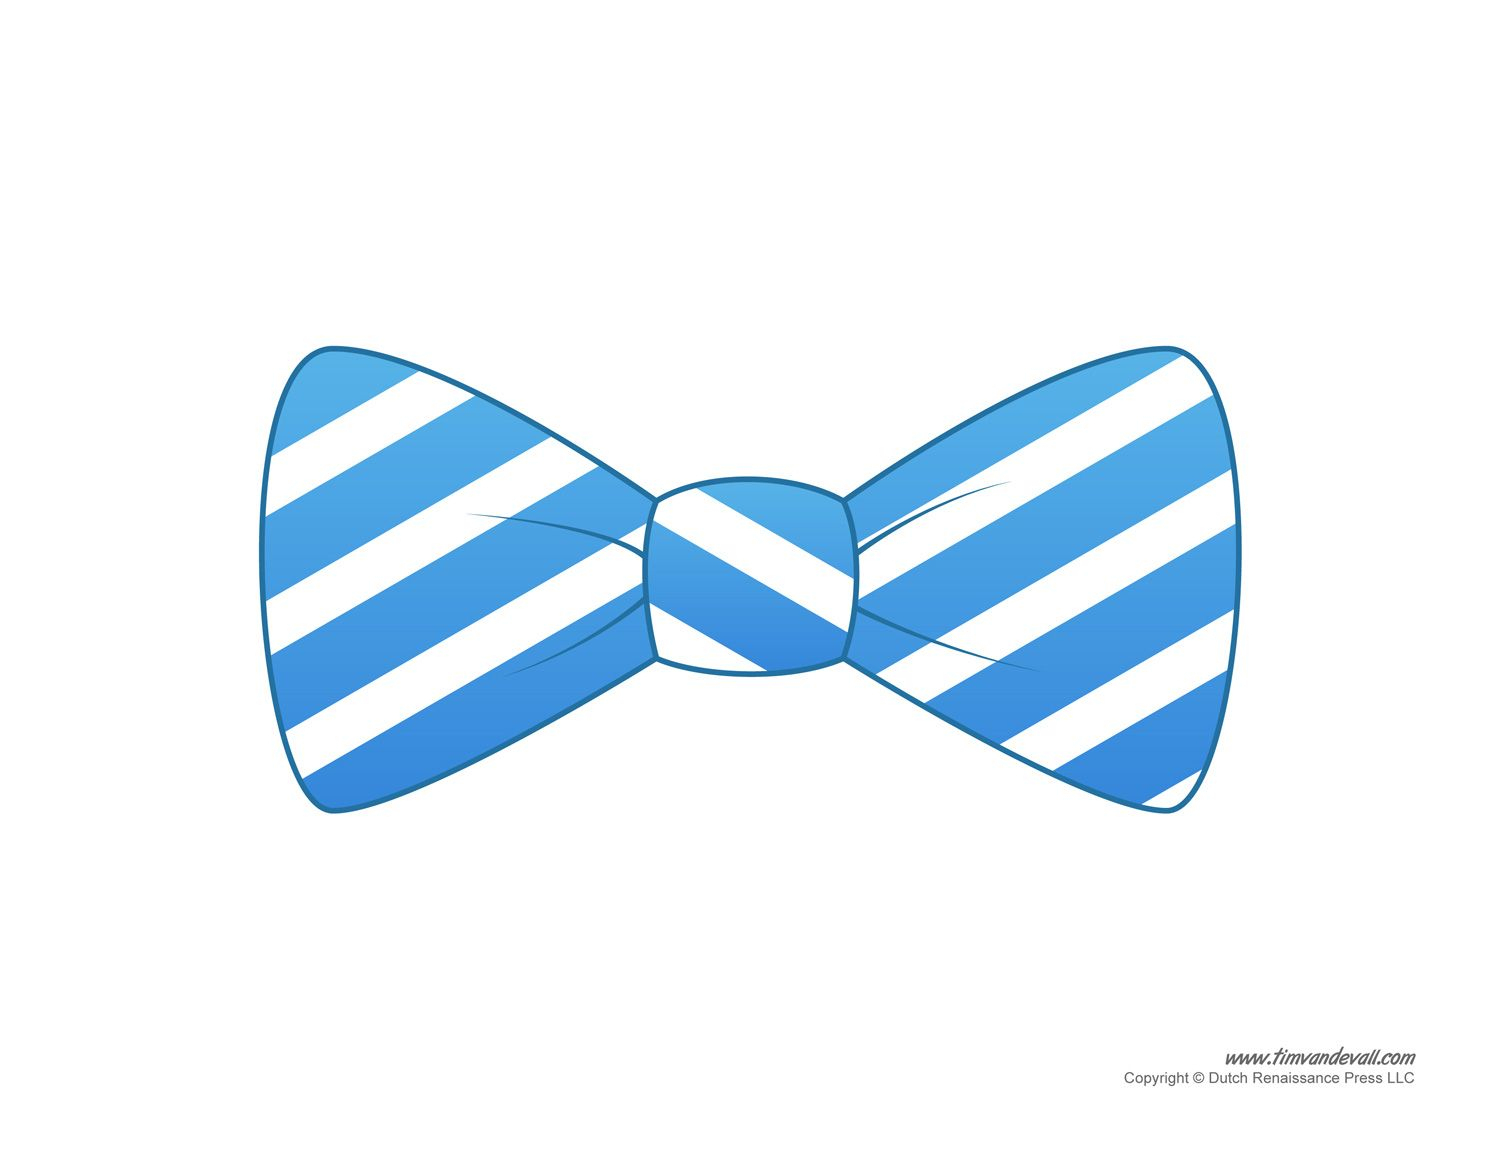 There Are 19 Bow Tie Templates To Choose From, So Chances Are We&amp;#039;ve - Free Bow Tie Template Printable